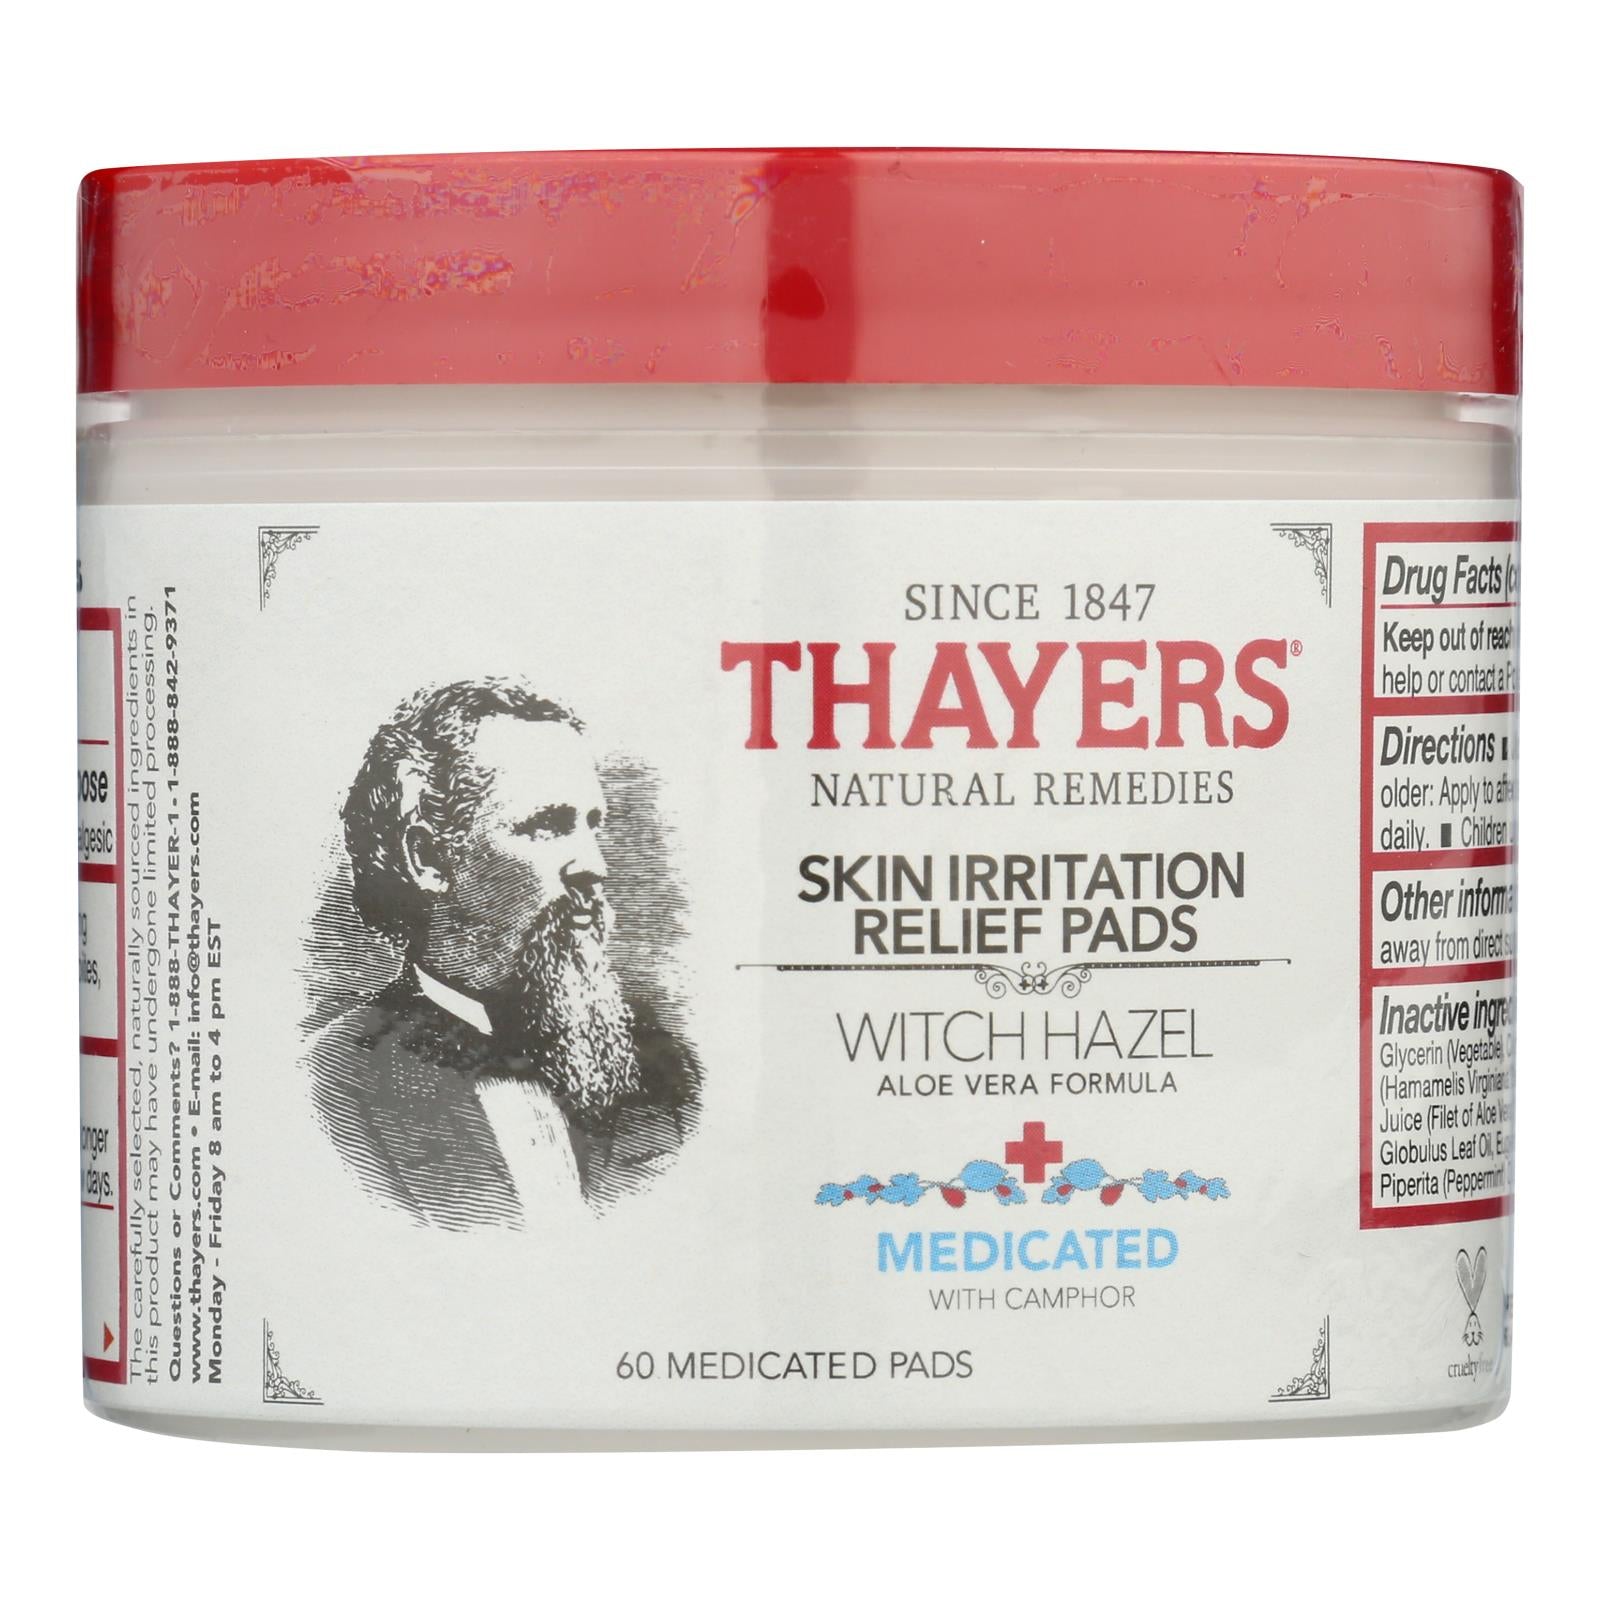 Thayer's Natural Remedies Superhazel Topical Pain Reliever Pads  - 1 Each - 60 Pads